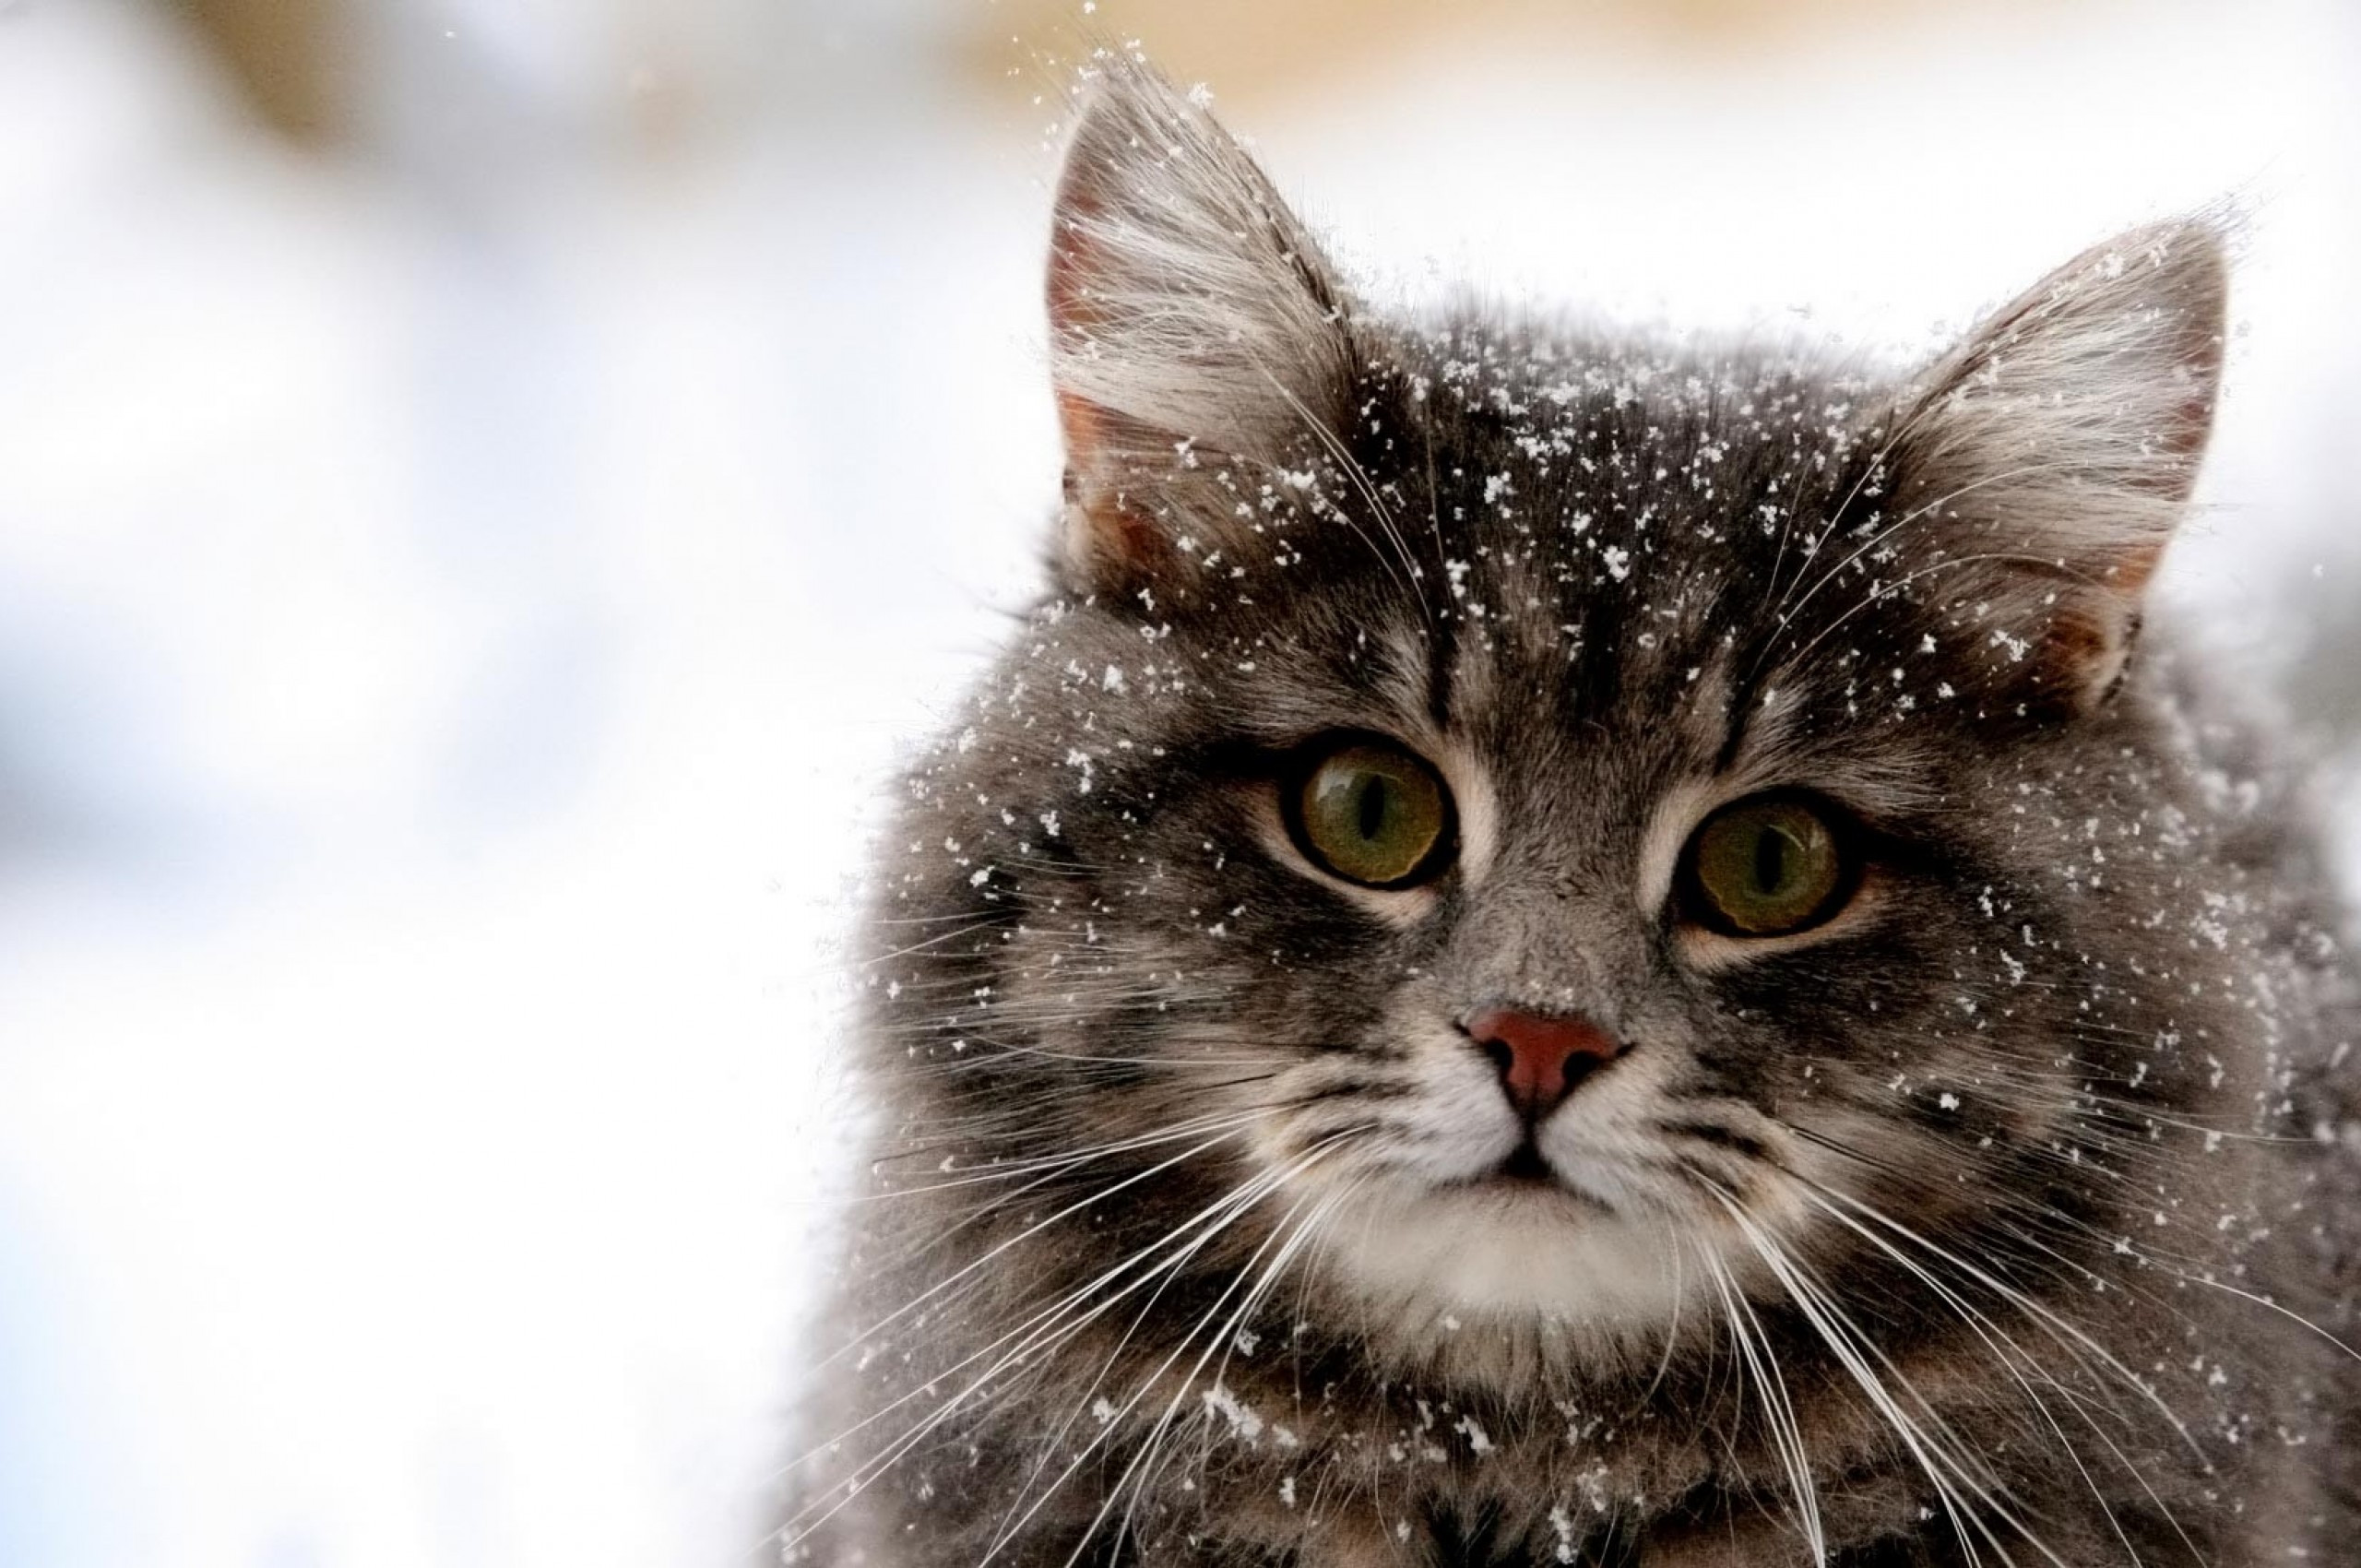 Download 2560x1700 Cat, Snow, Fluffy, Looking At Viewer, Cute Wallpaper for Chromebook Pixel